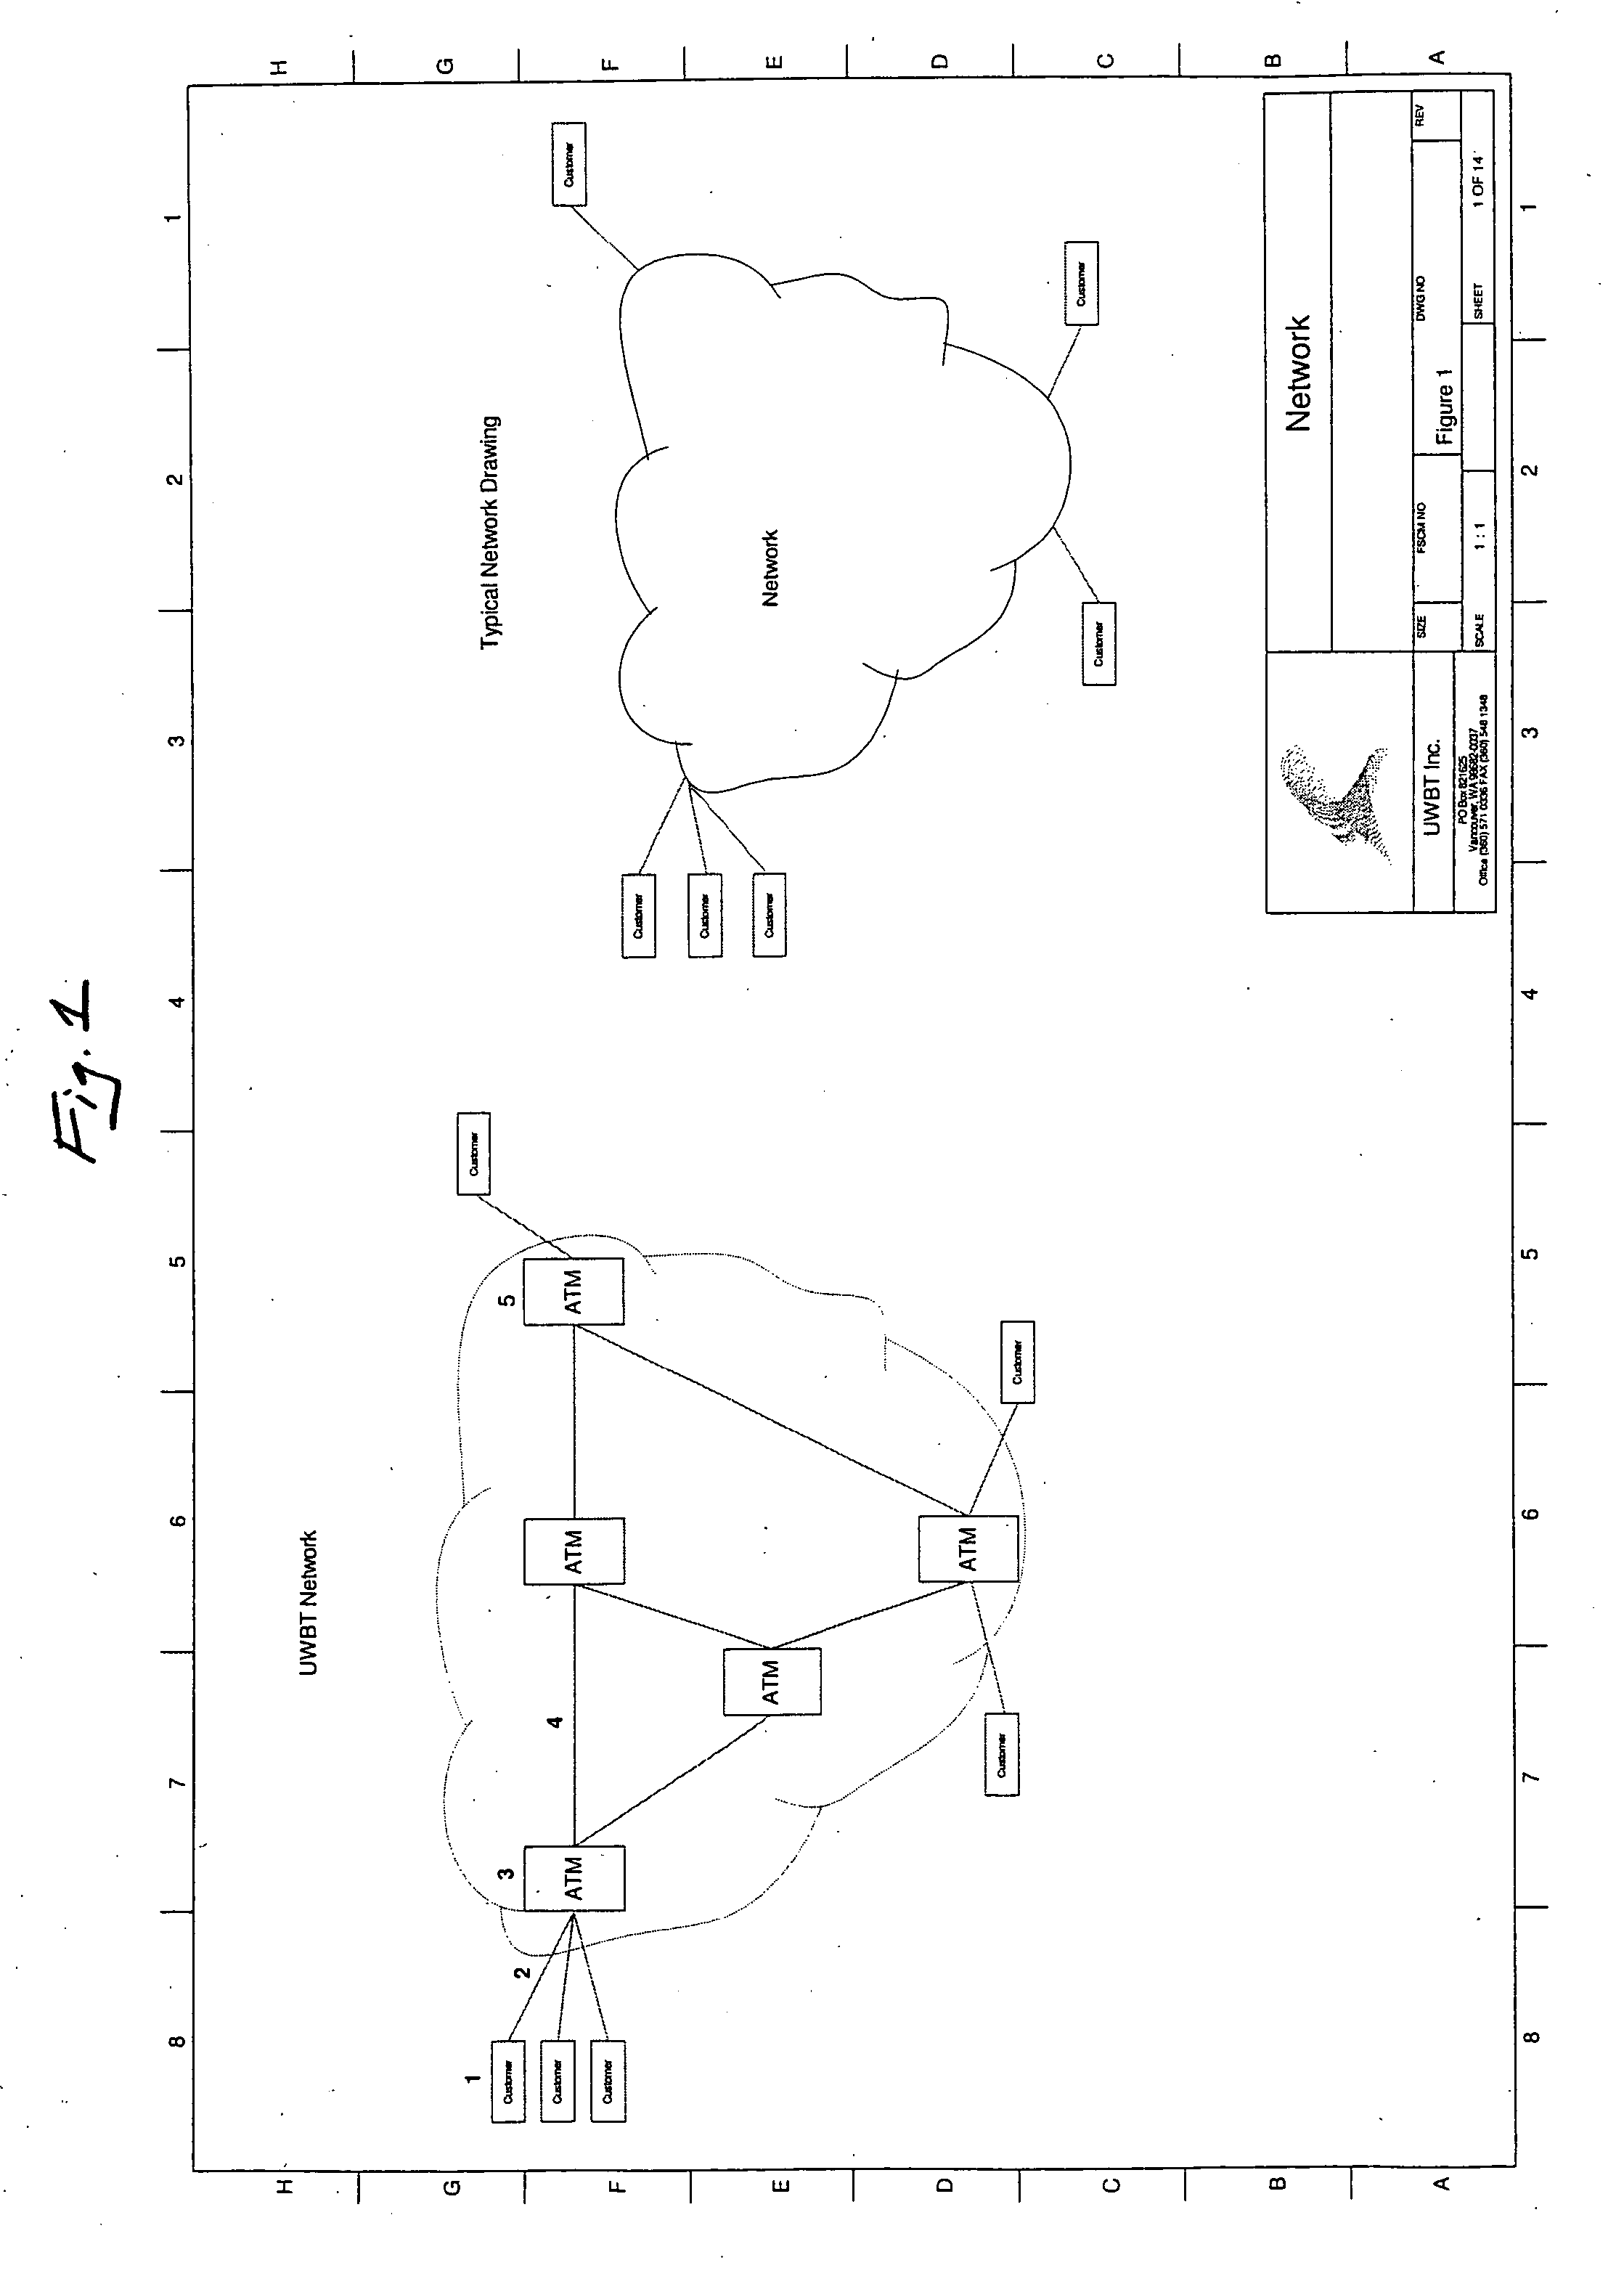 Videoconferencing device and system